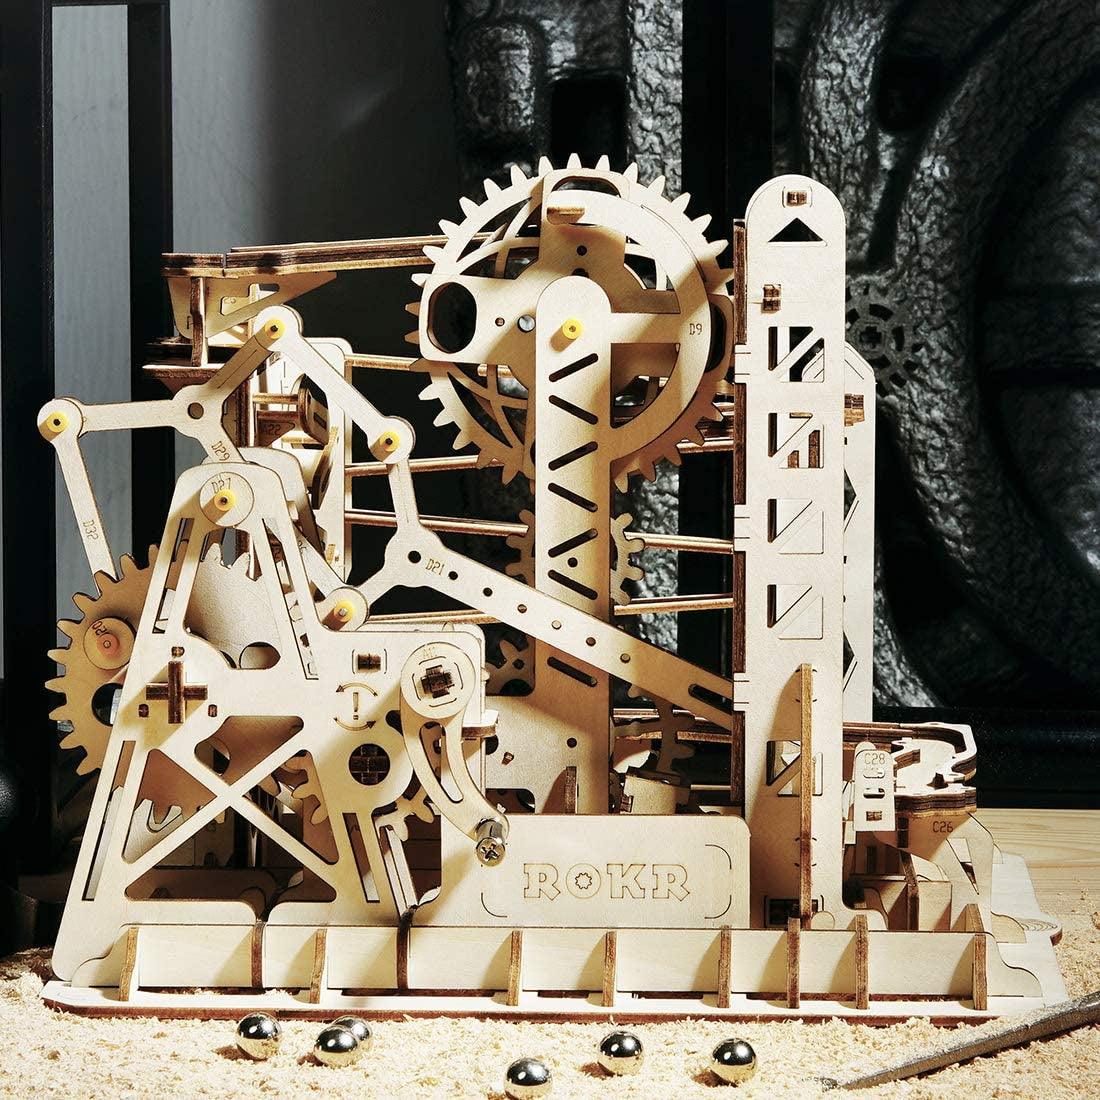 3D Assembly Wooden Puzzle Brain Teaser Game Mechanical Gears Set Model Kit Marble Run Set Unique Craft Kits Lift Coaster - WoodArtSupply